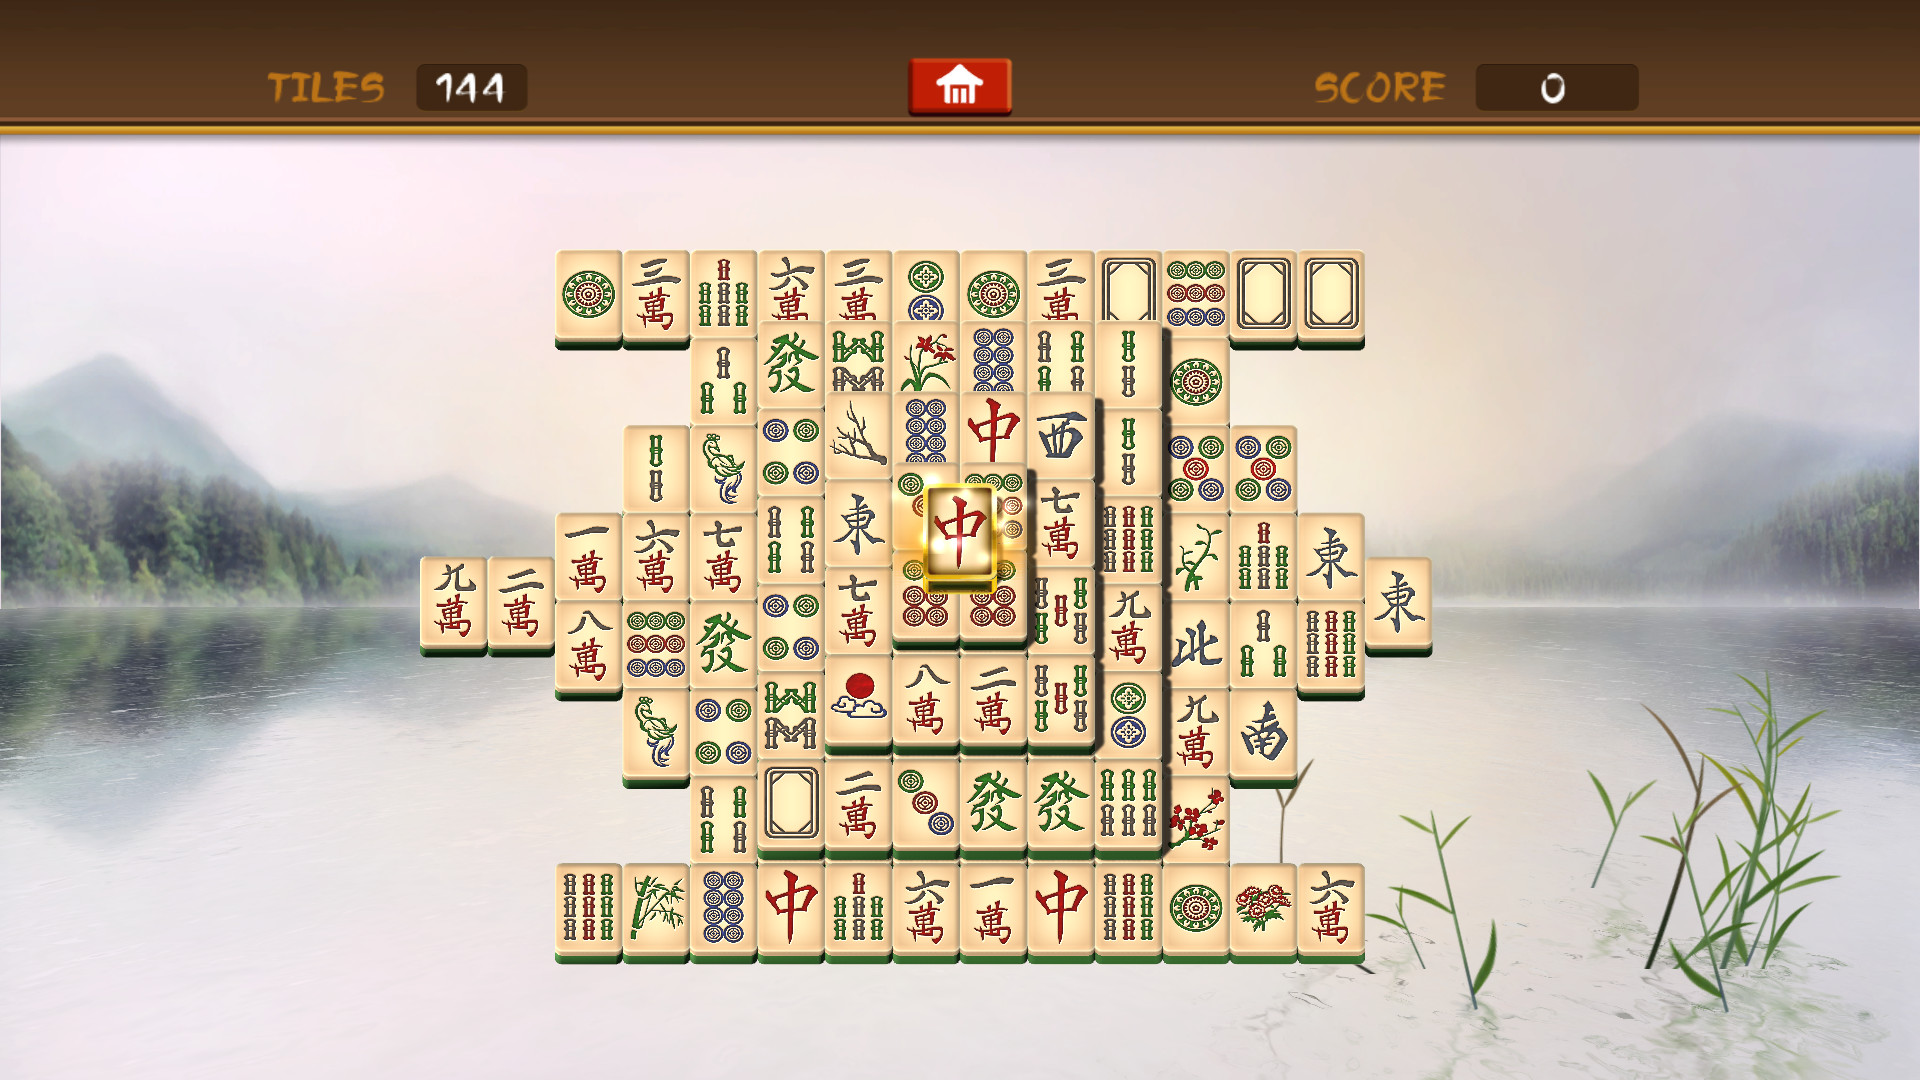 Mahjong Solitaire: Reviews, Features, Pricing & Download